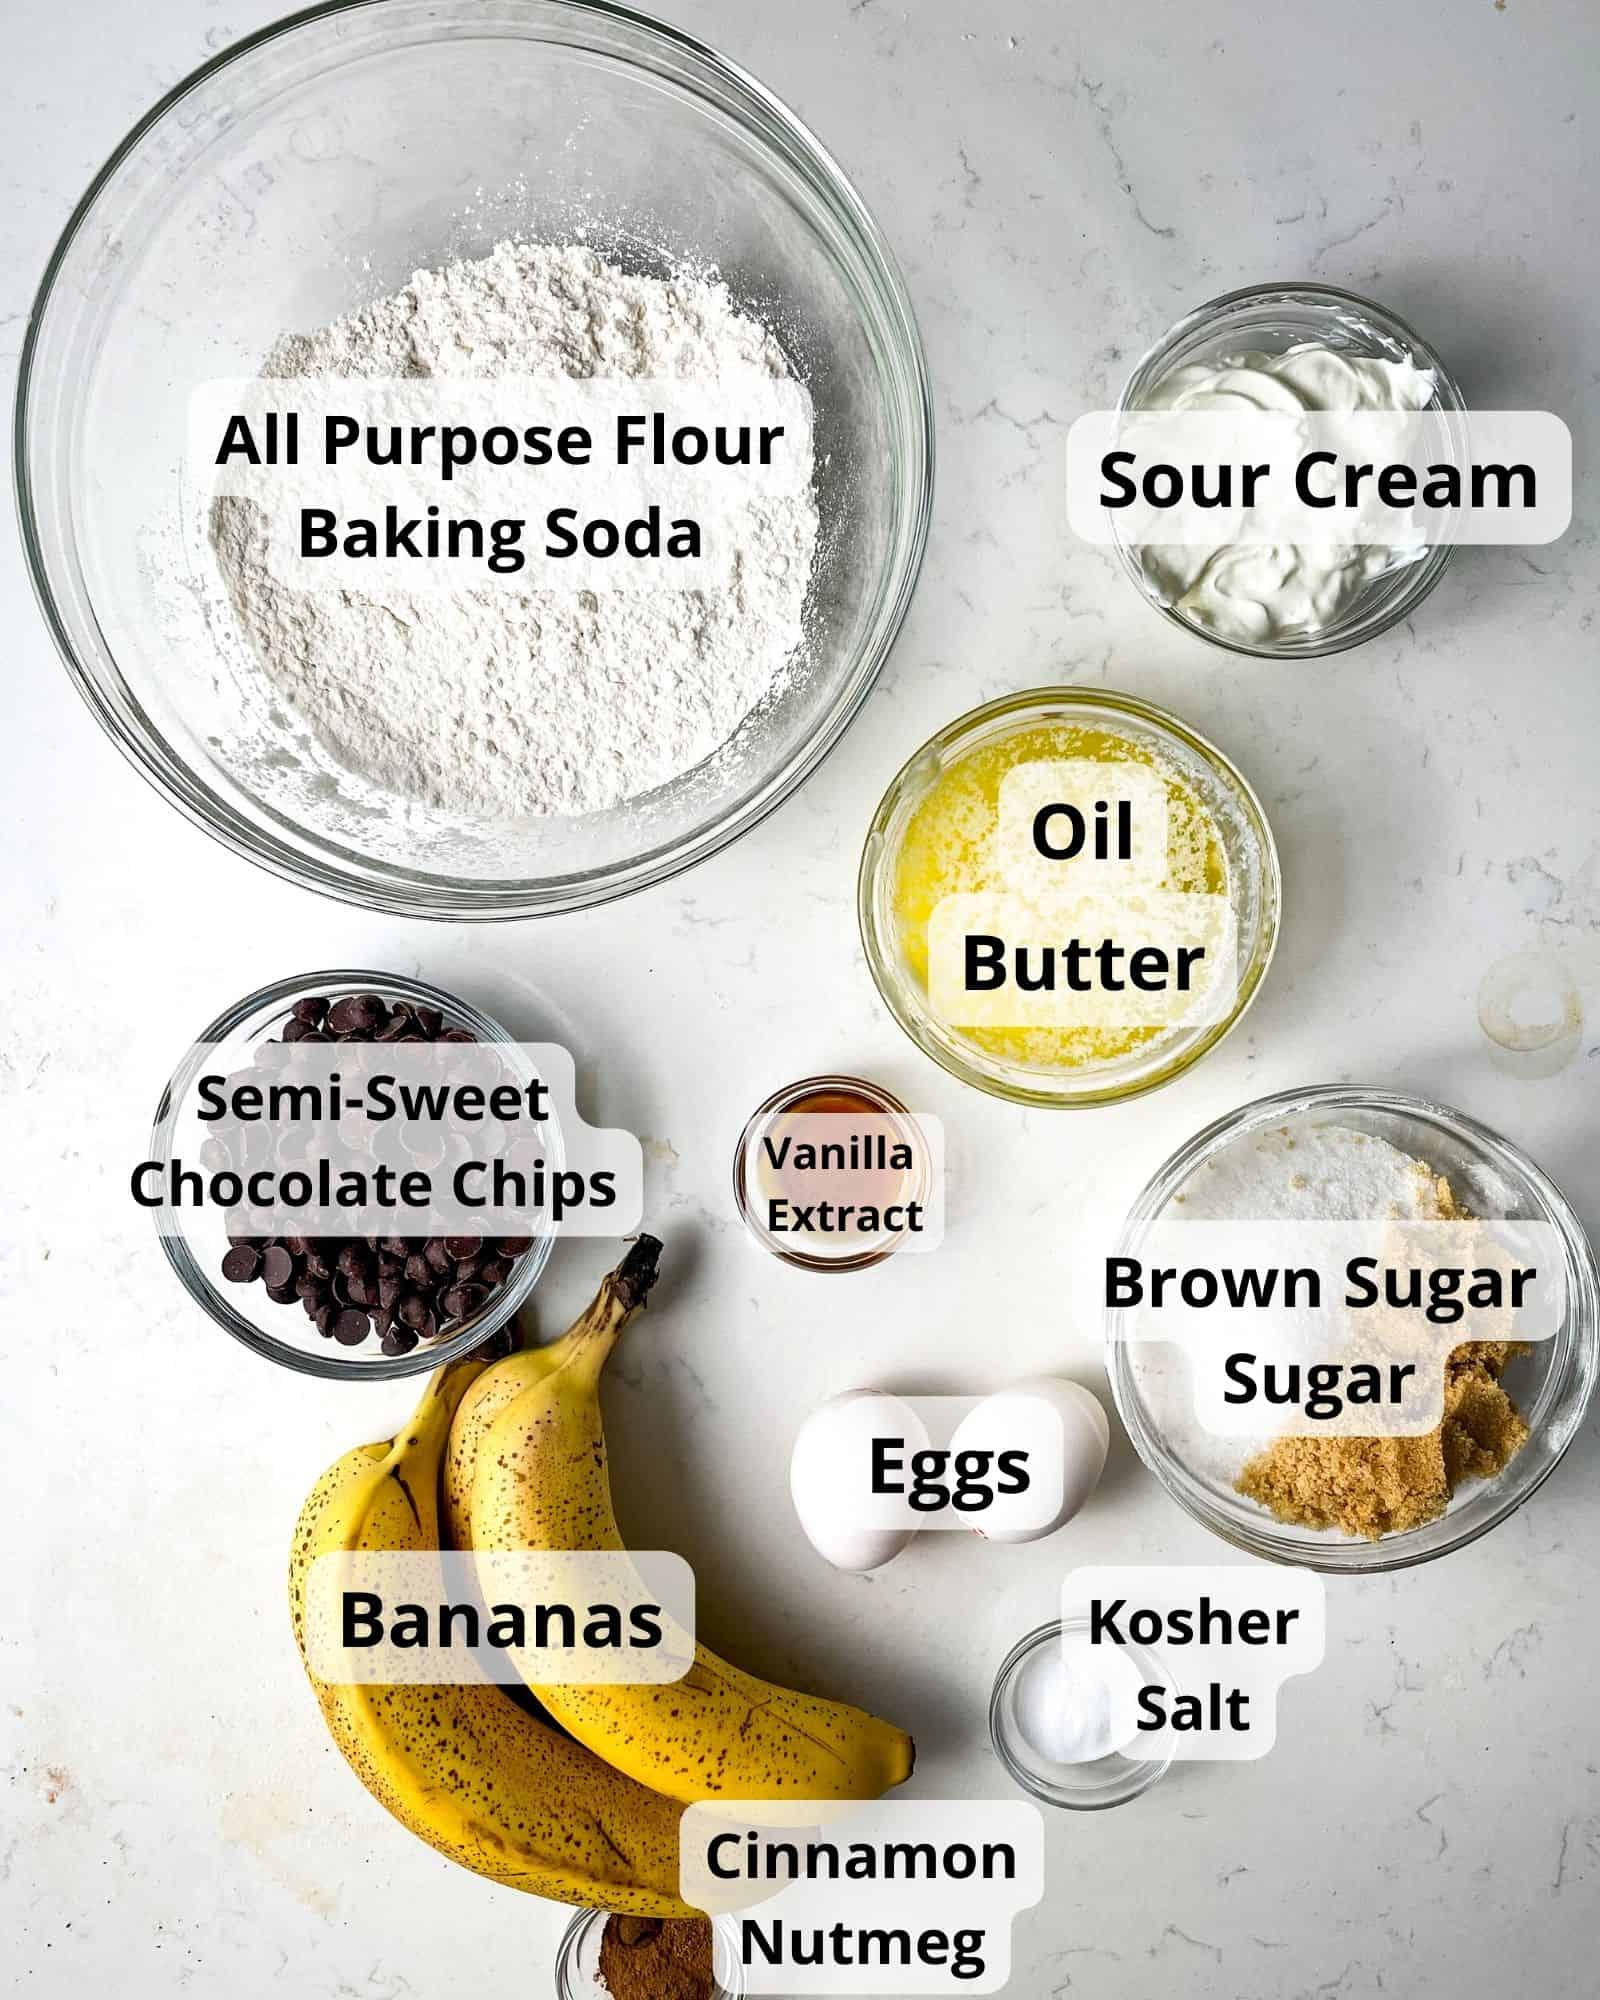 ingredients to make chocolate chip banana bread - all purpose flour, baking soda, kosher salt, oil, butter, sour cream, bananas, eggs, brown sugar, sugar, cinnamon, nutmeg, melted butter. and chocolate chips.